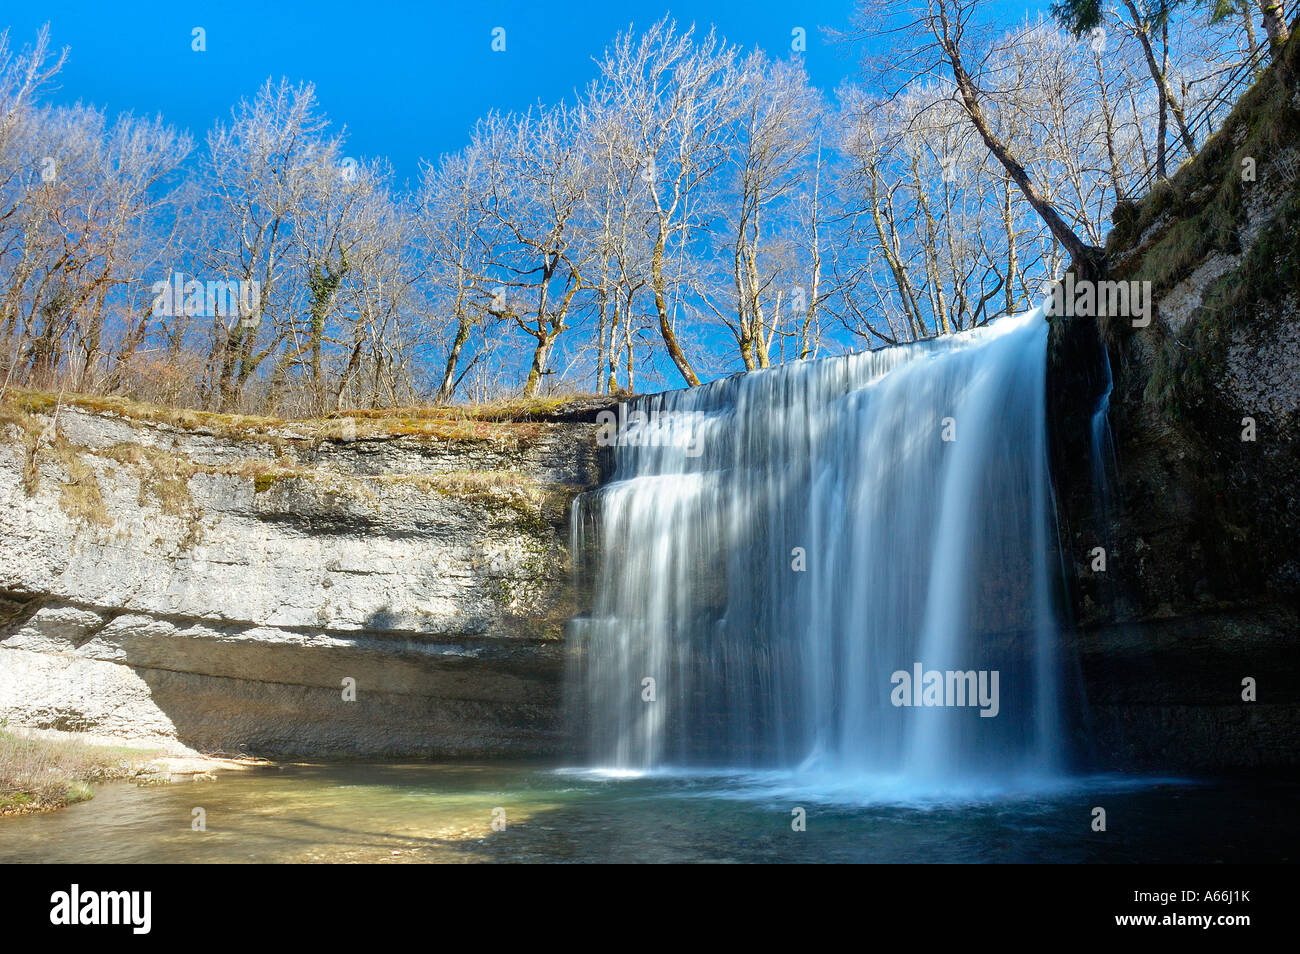 The 'Saut de la Forge' waterfall in the chain of falls on the Herrison River in the French Jura mountains Stock Photo